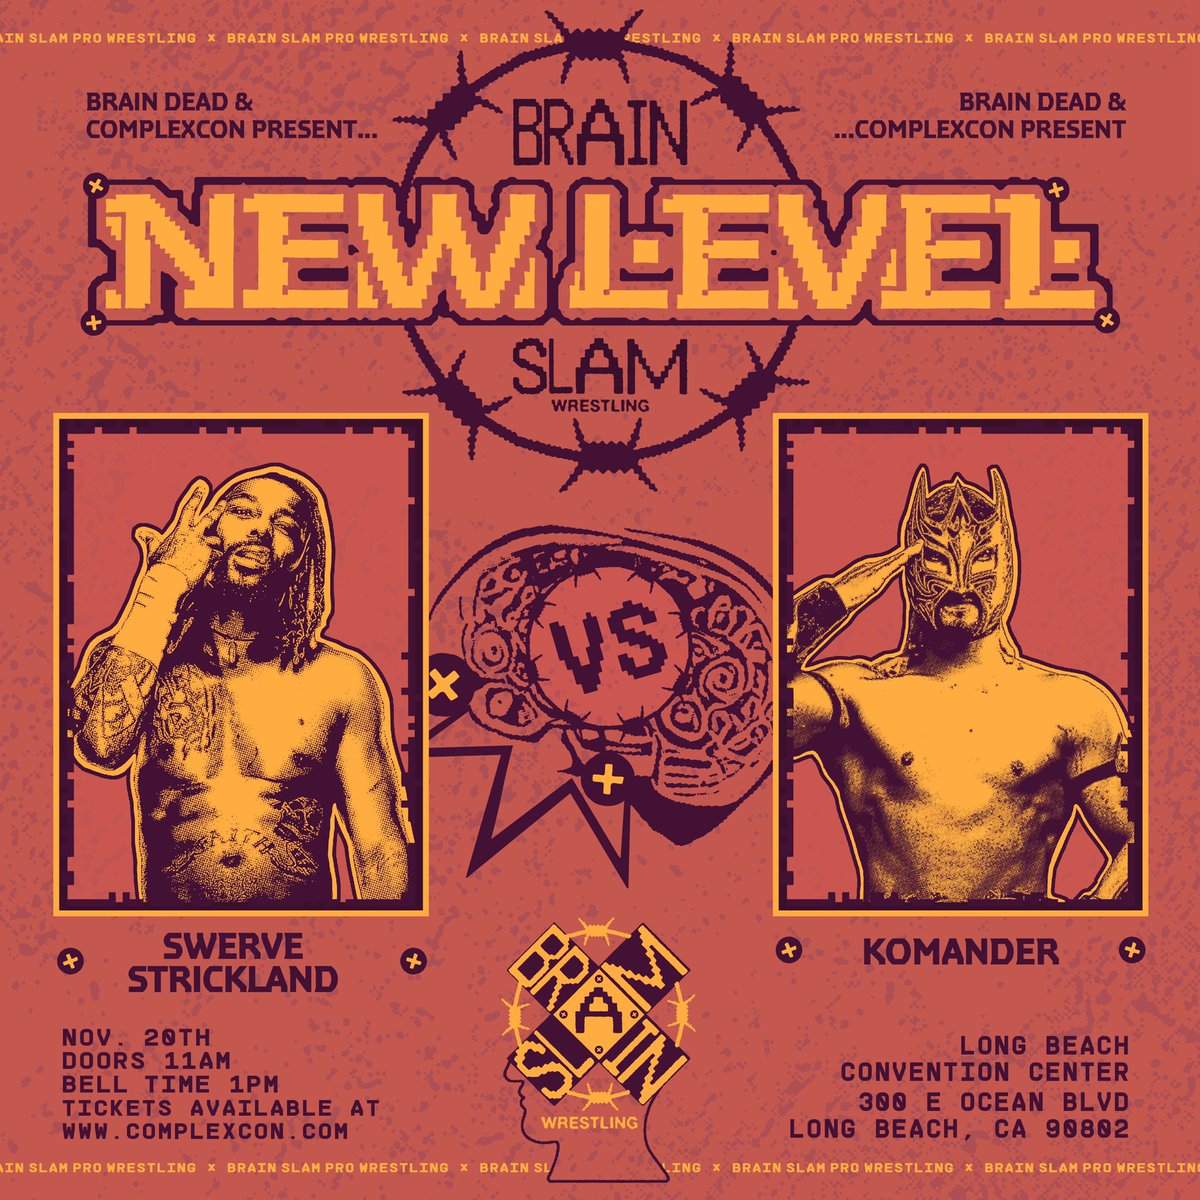 We are honored to announce our Main Event for Day 2 of Brain Slam at @ComplexCon - @AEW Mega Star @swerveconfident takes on the new king of the ropes @KomandercrMX in an all out war - Don’t miss the nonstop action next weekend in LBC - ticket info here: tixr.com/groups/complex…